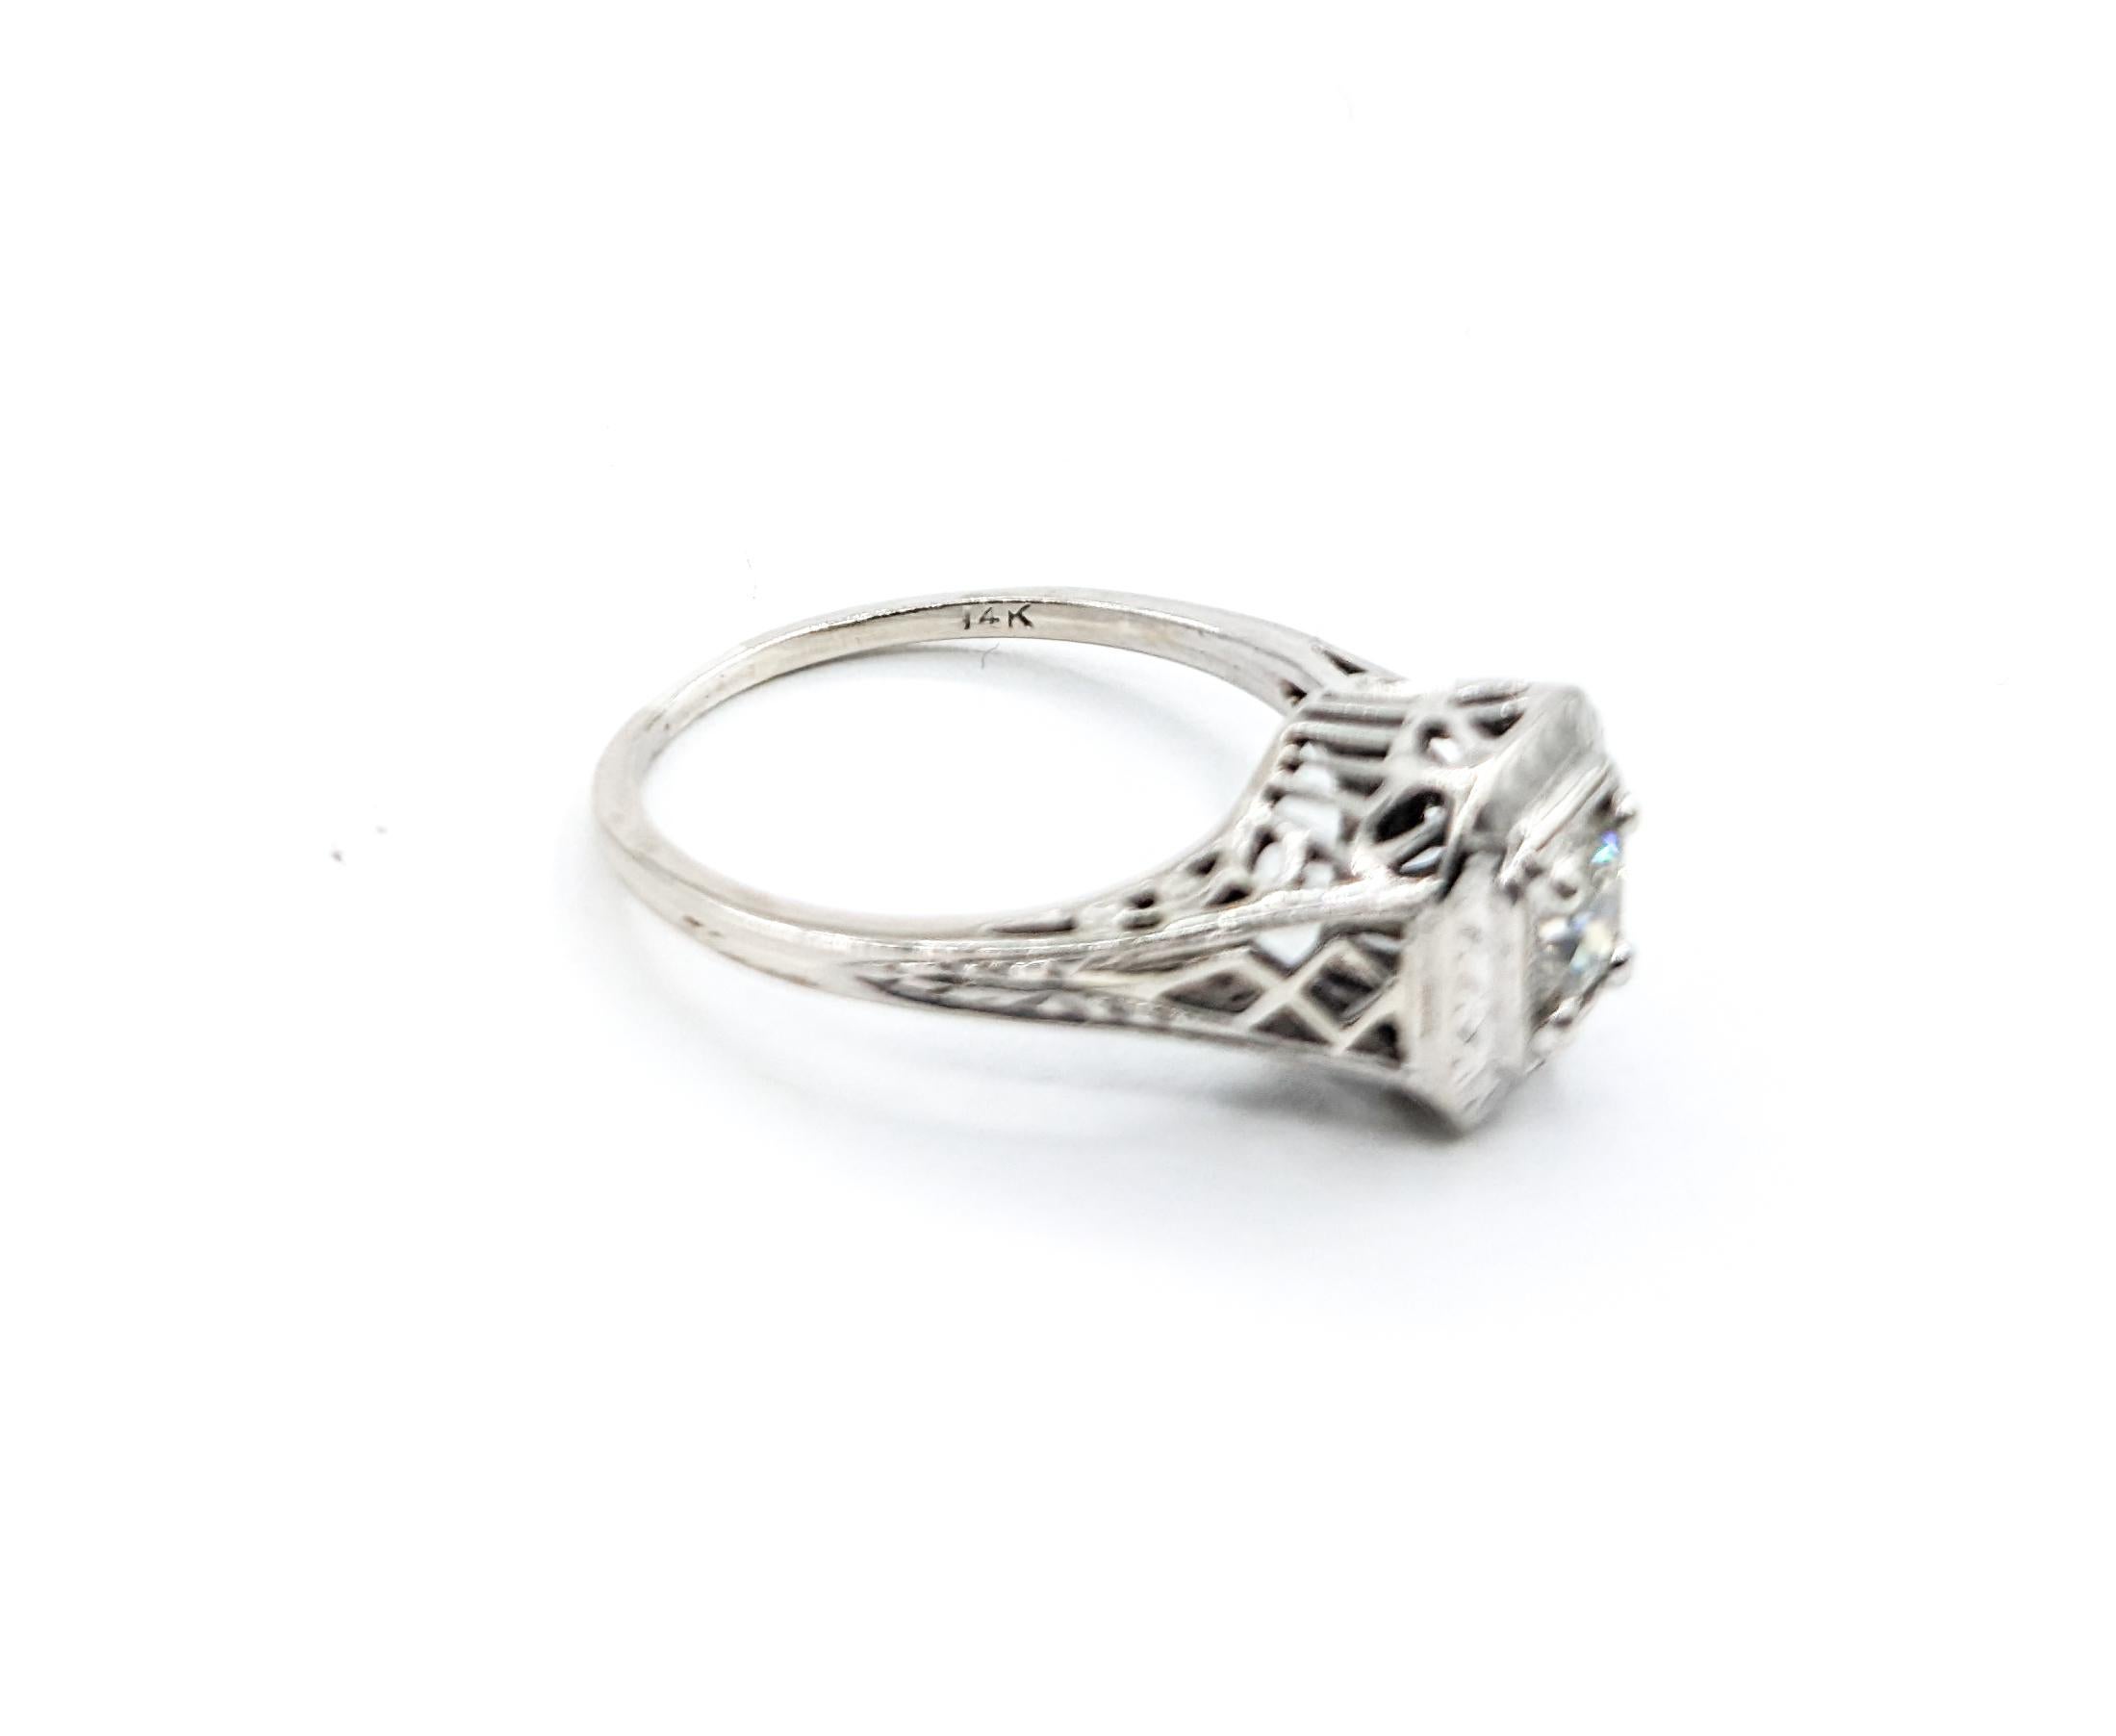 Antique Art Deco Diamond Ring In White Gold In Excellent Condition For Sale In Bloomington, MN